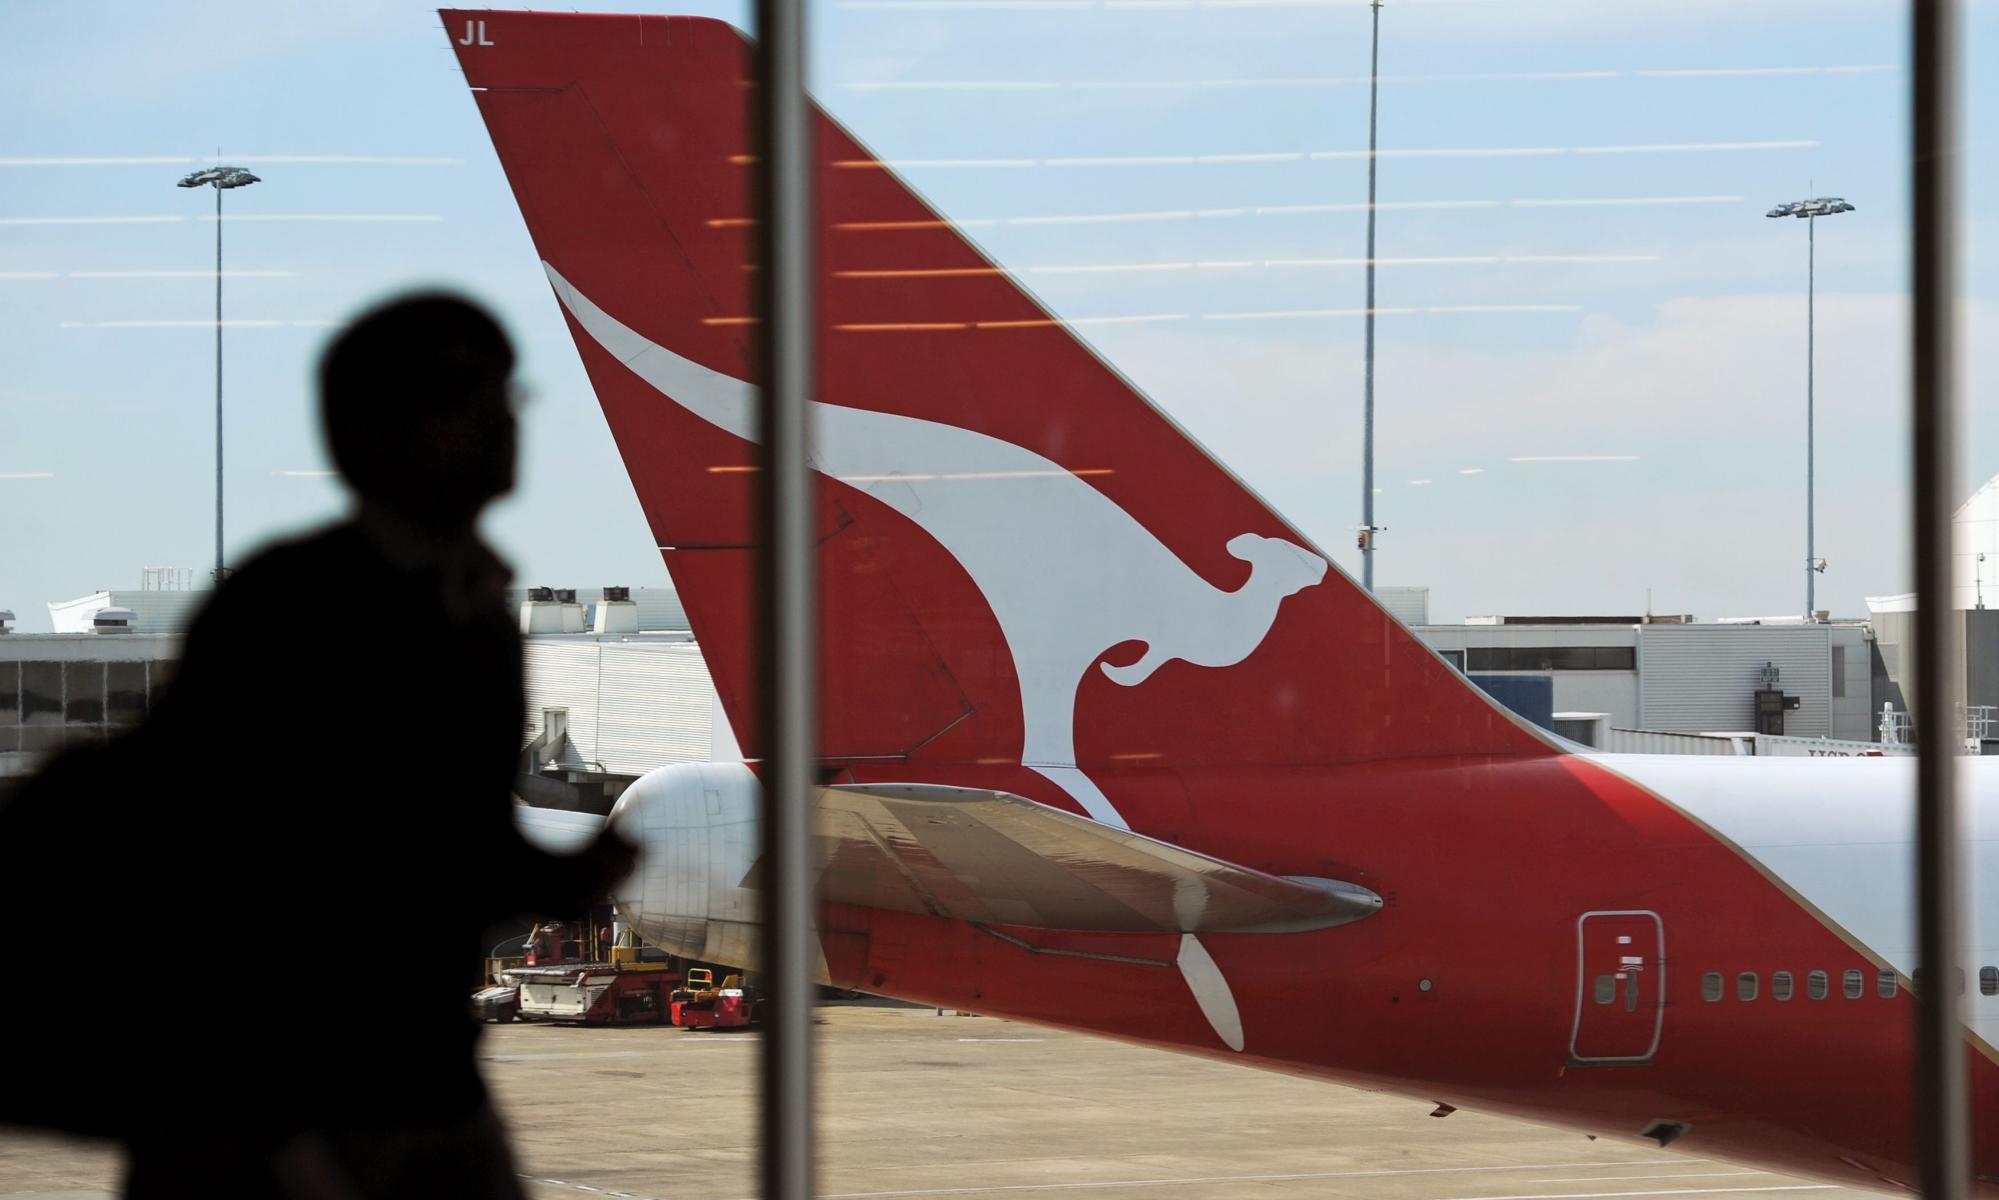 qantas decision to reduce flight capacity may have led to rba rate hike, inquiry finds